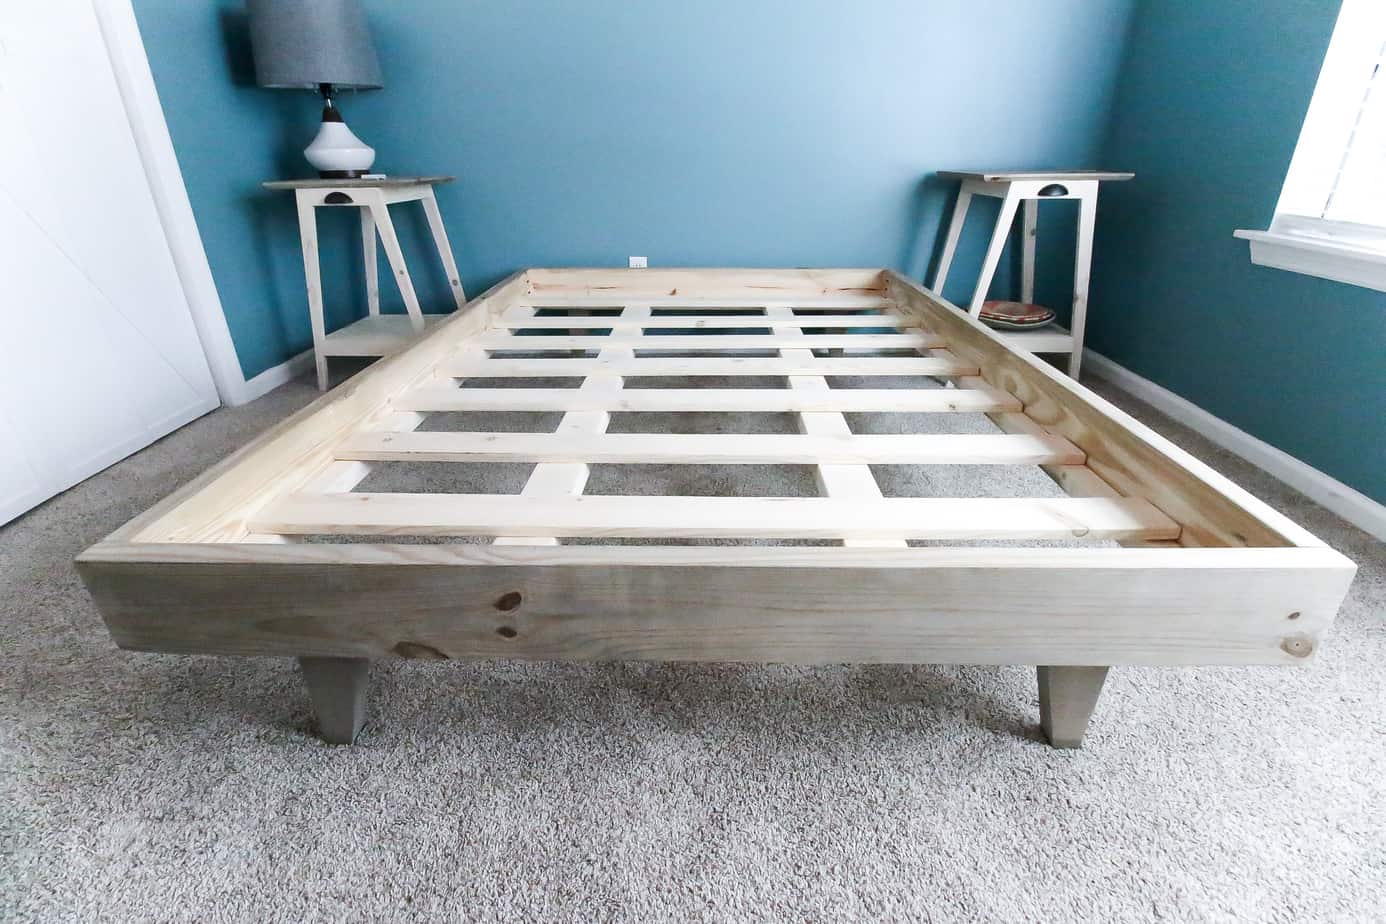 How To Build A Platform Bed For 50, How To Build A Queen Size Wood Bed Frame